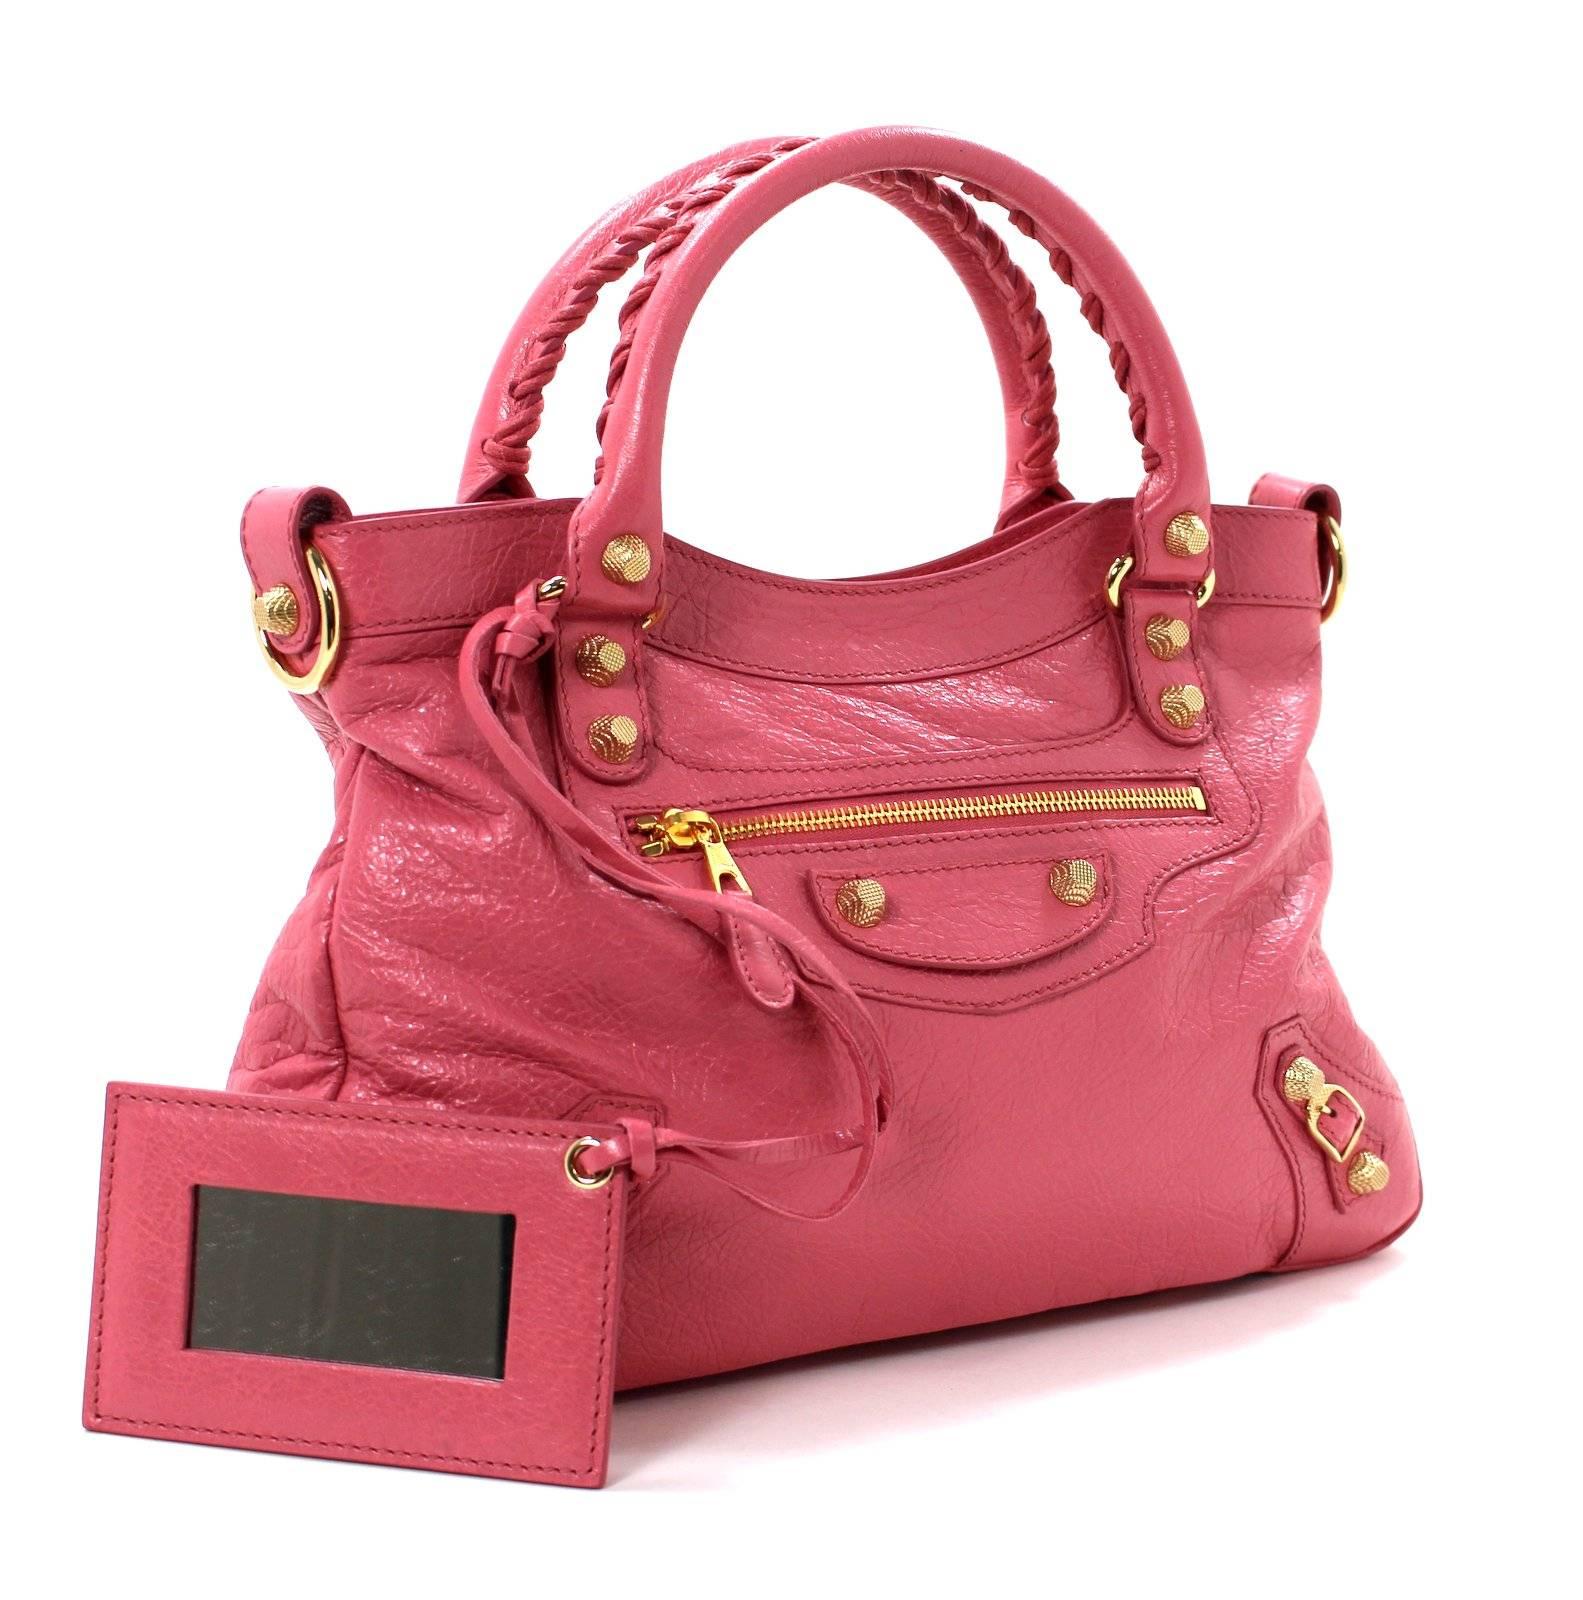 Balenciaga PINK Lambskin Arena Giant 12 Town Bag with Gold Hardware- NEW; retail $1,895.00 plus taxes
The iconic Balenciaga silhouette is recreated each season in exciting new and classic colors.  The brighter hues are always the most sought after